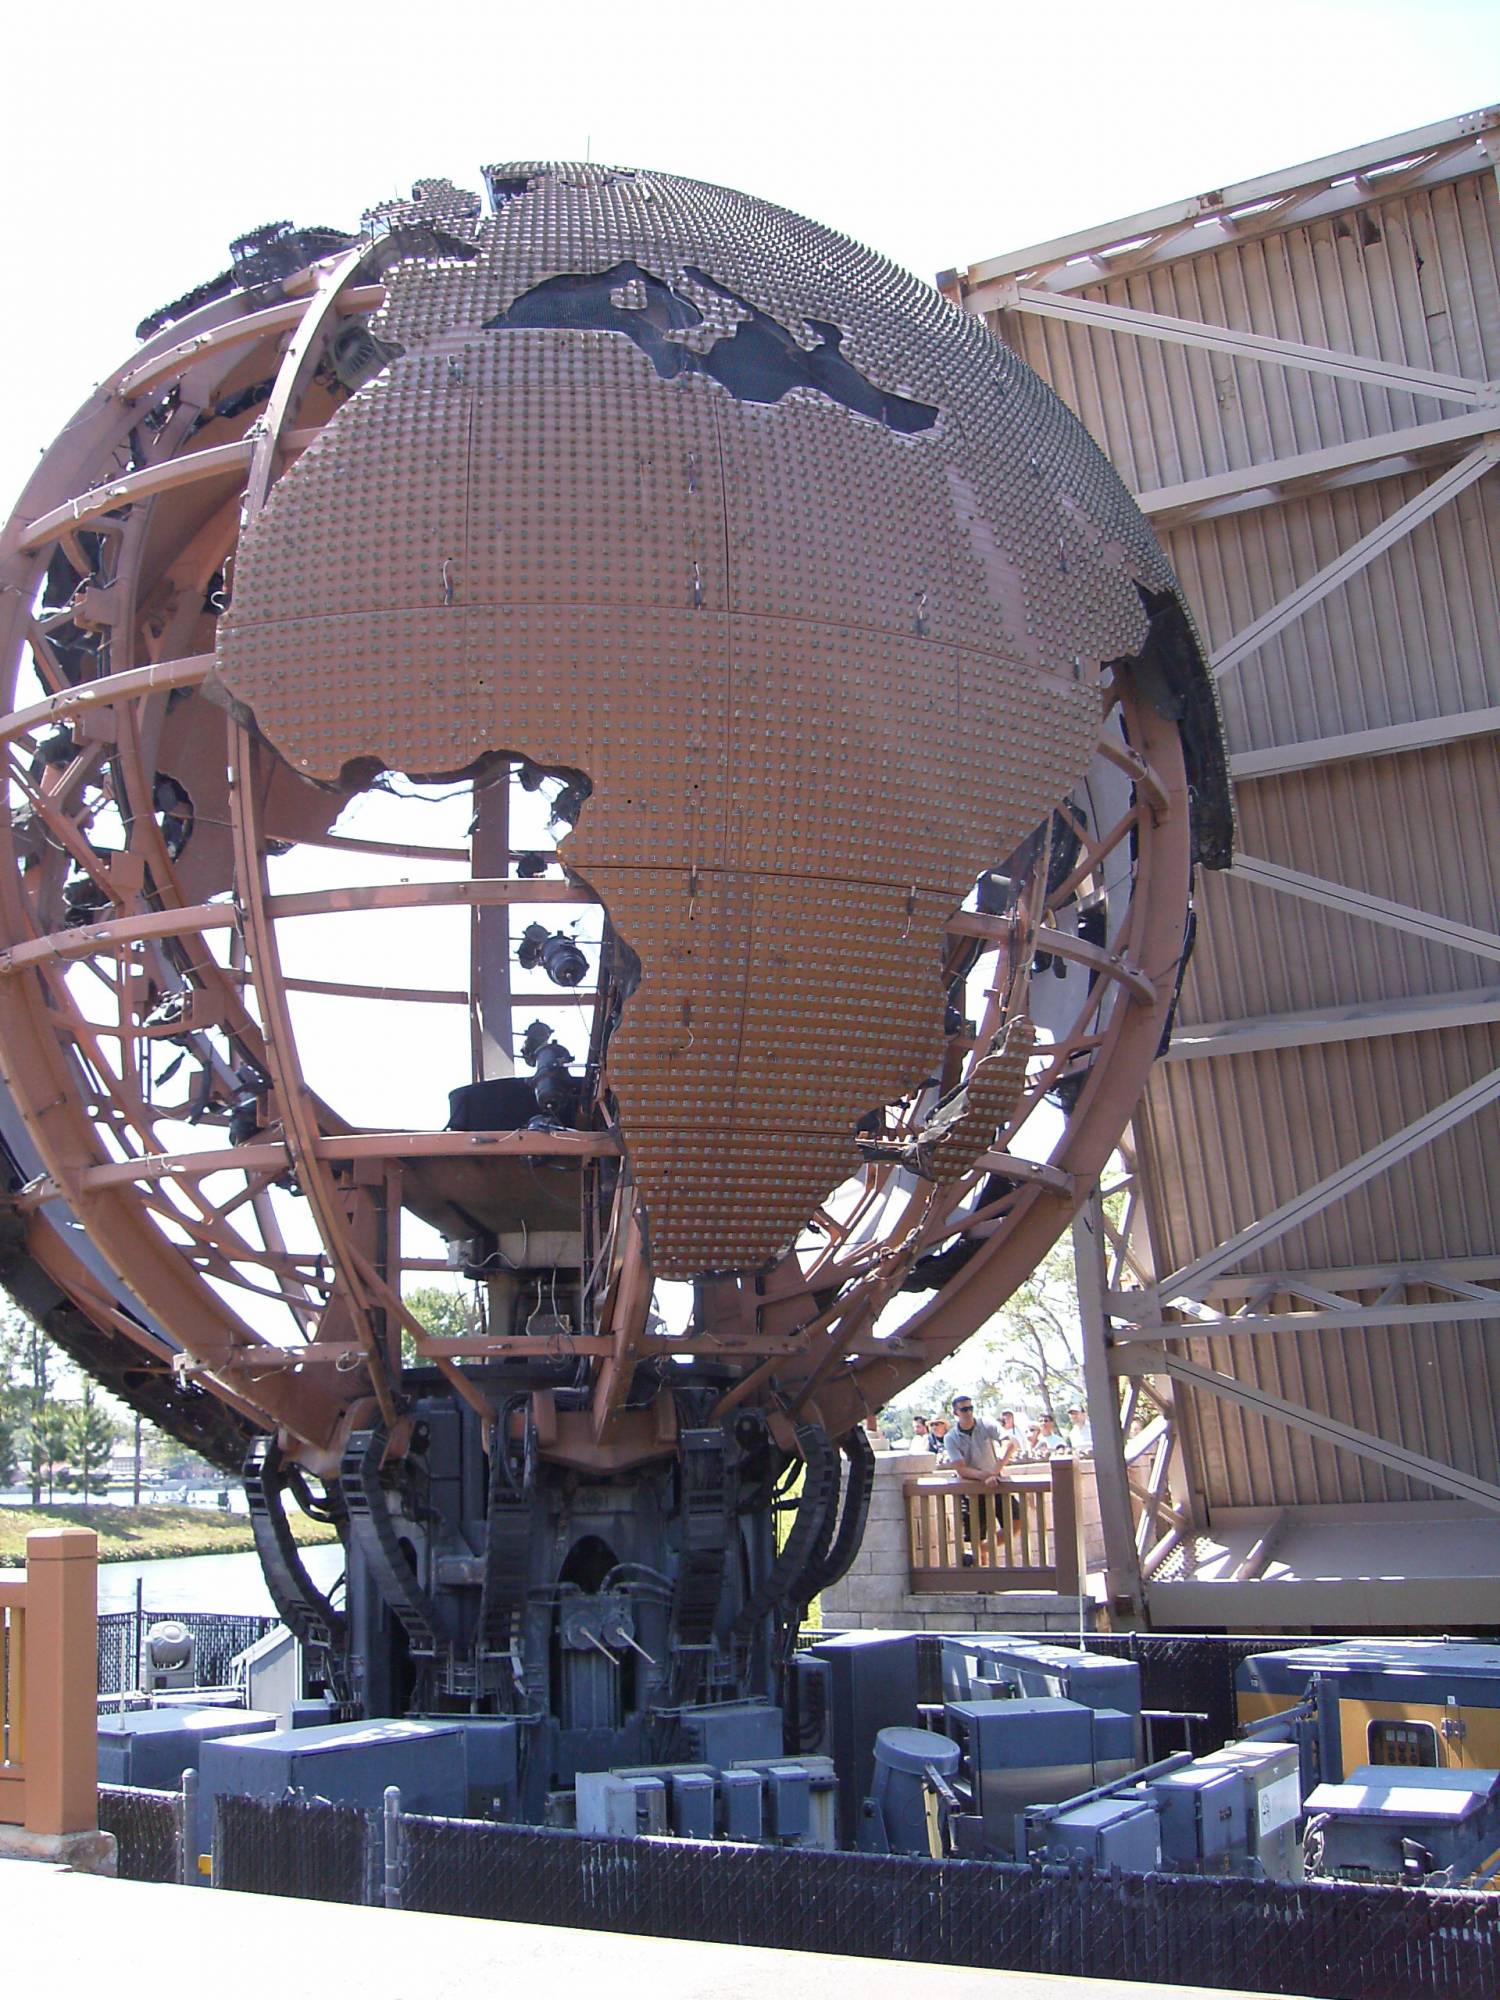 Illuminations Globe being brought in on a barge